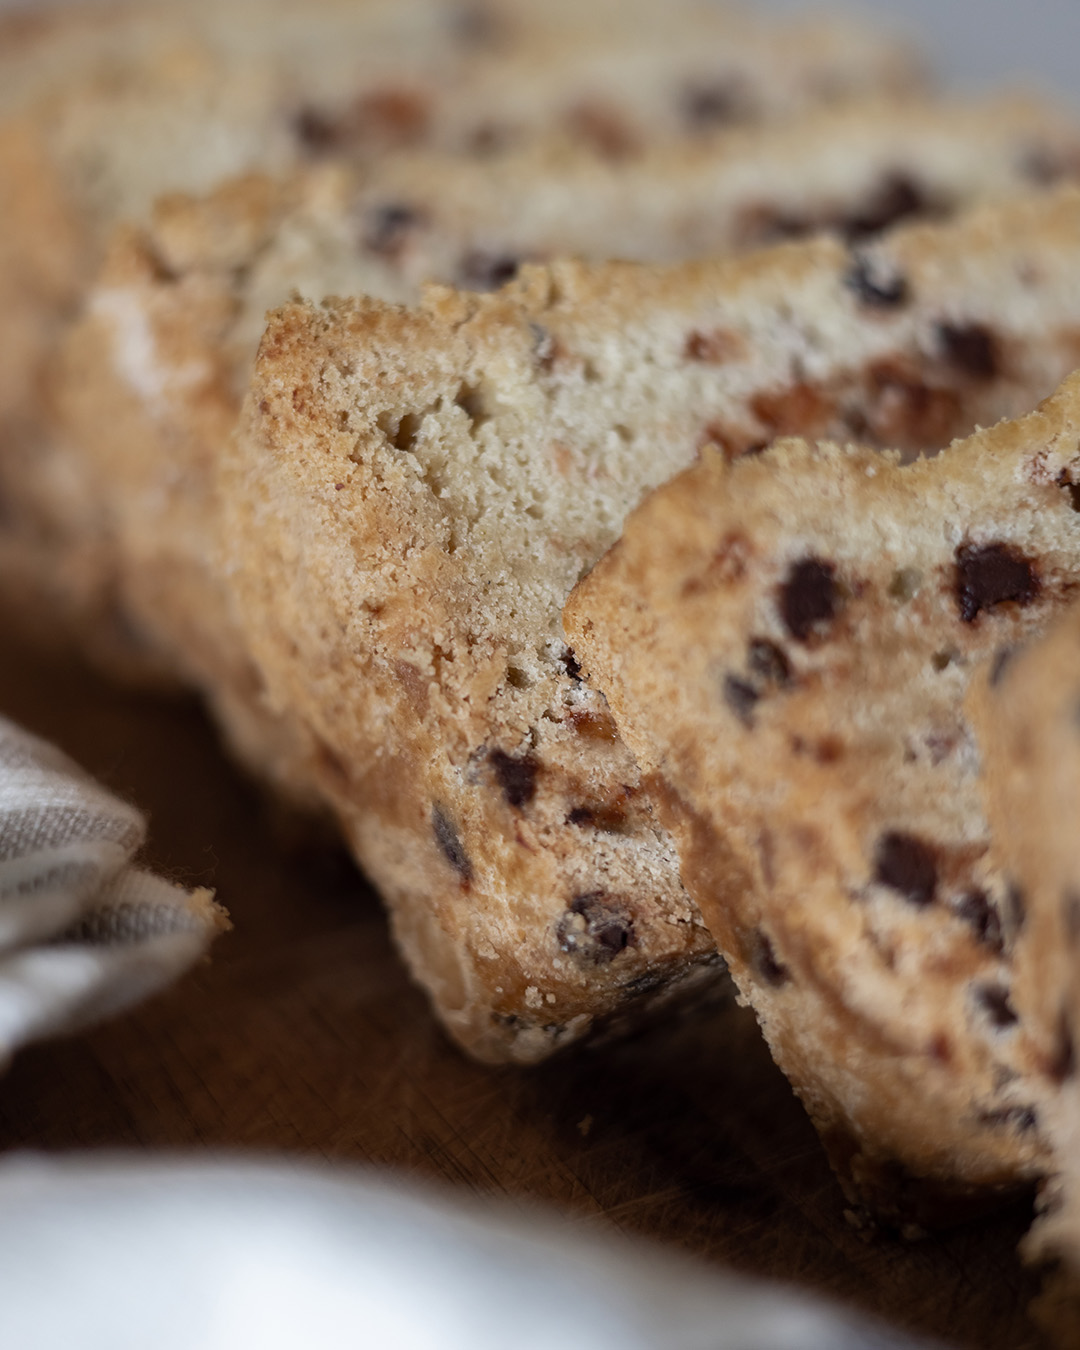 This gluten-free chocolate chip muffin loaf recipe is an easy gluten-free breakfast or snack solution. Everything you love about a typical bakery muffin muffin, but in loaf form!